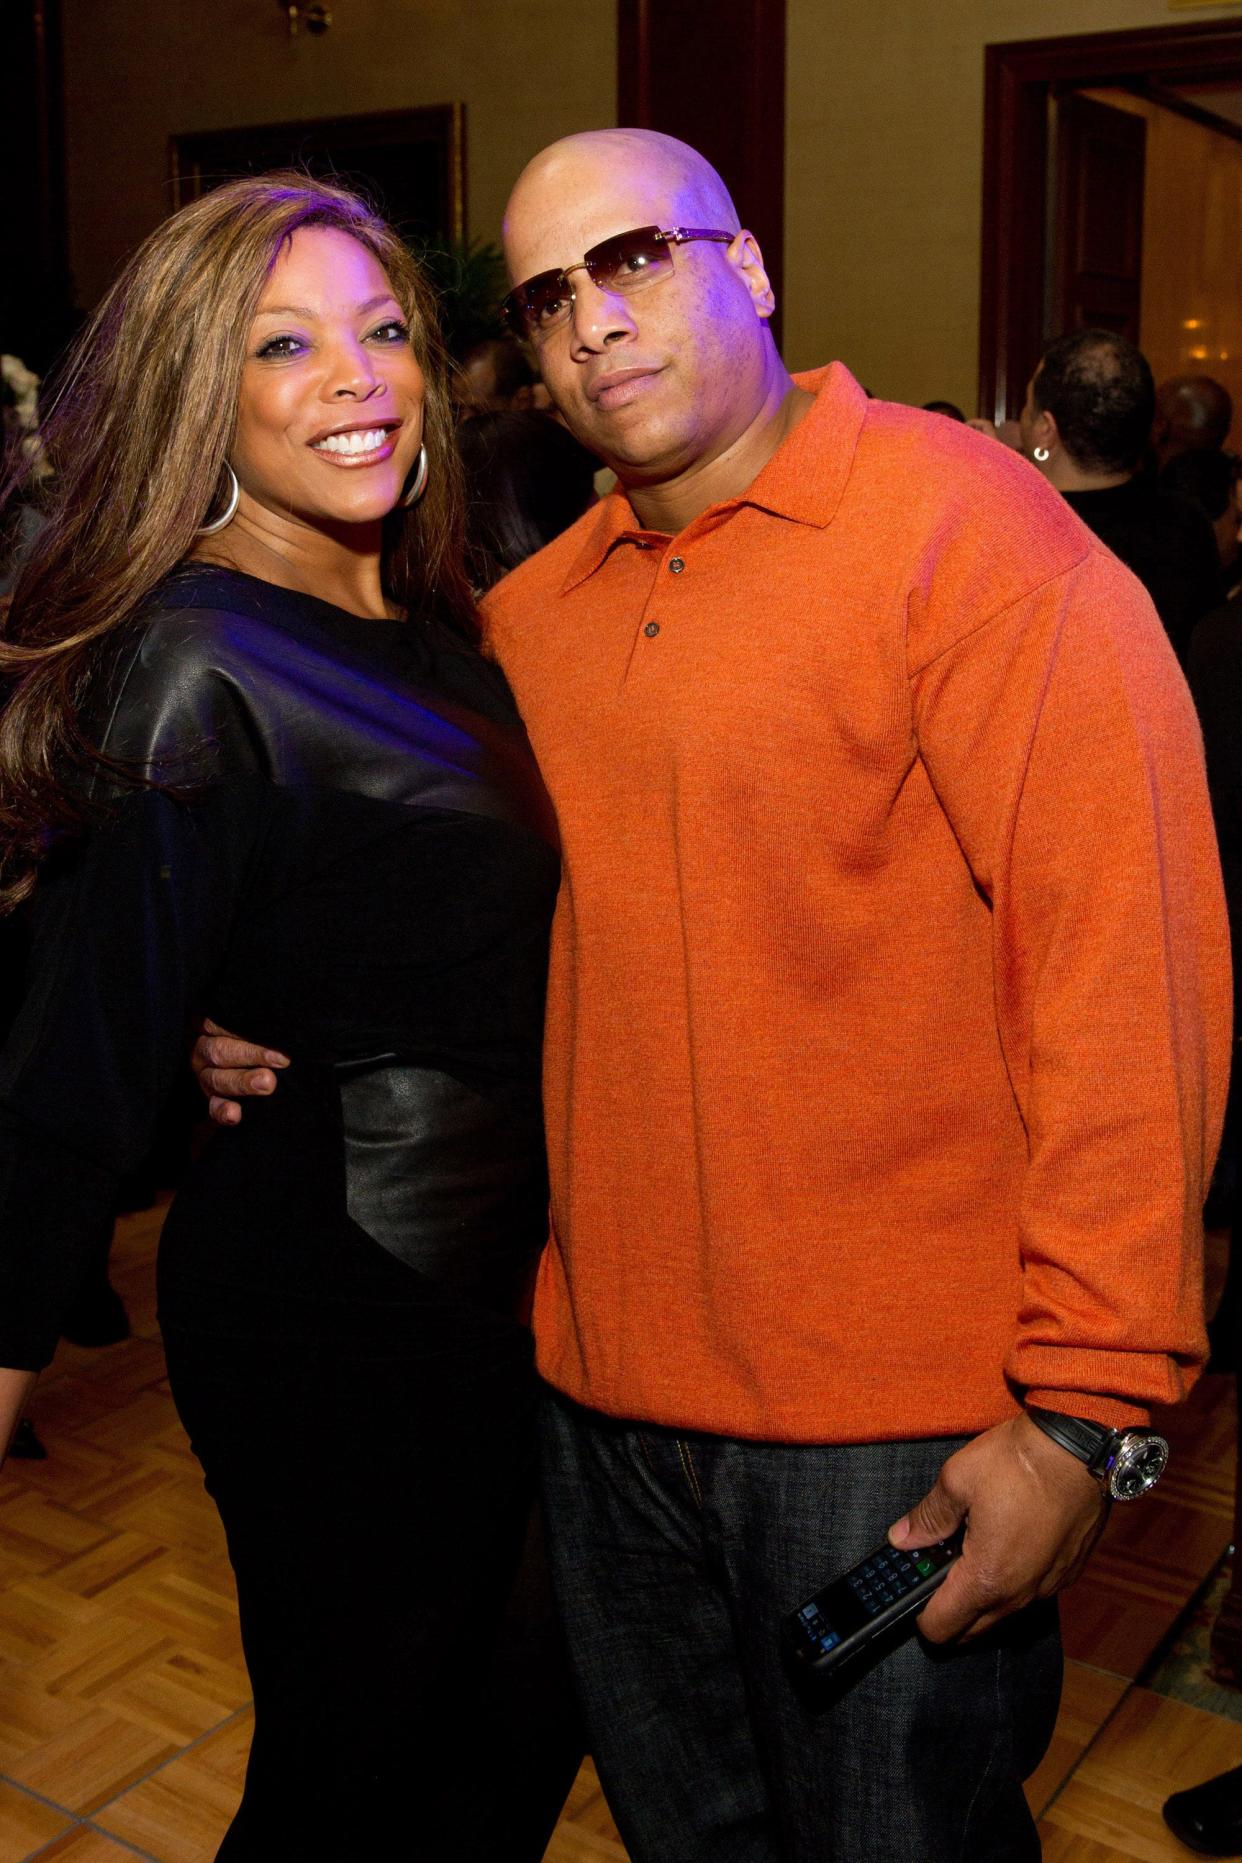 Wendy Williams and her ex-husband Kevin Hunter, photographed in 2011, were married for more than two decades and share one son Kevin Jr. Shortly after the couple's split in 2019, Williams' talk show abruptly ended amid health struggles.